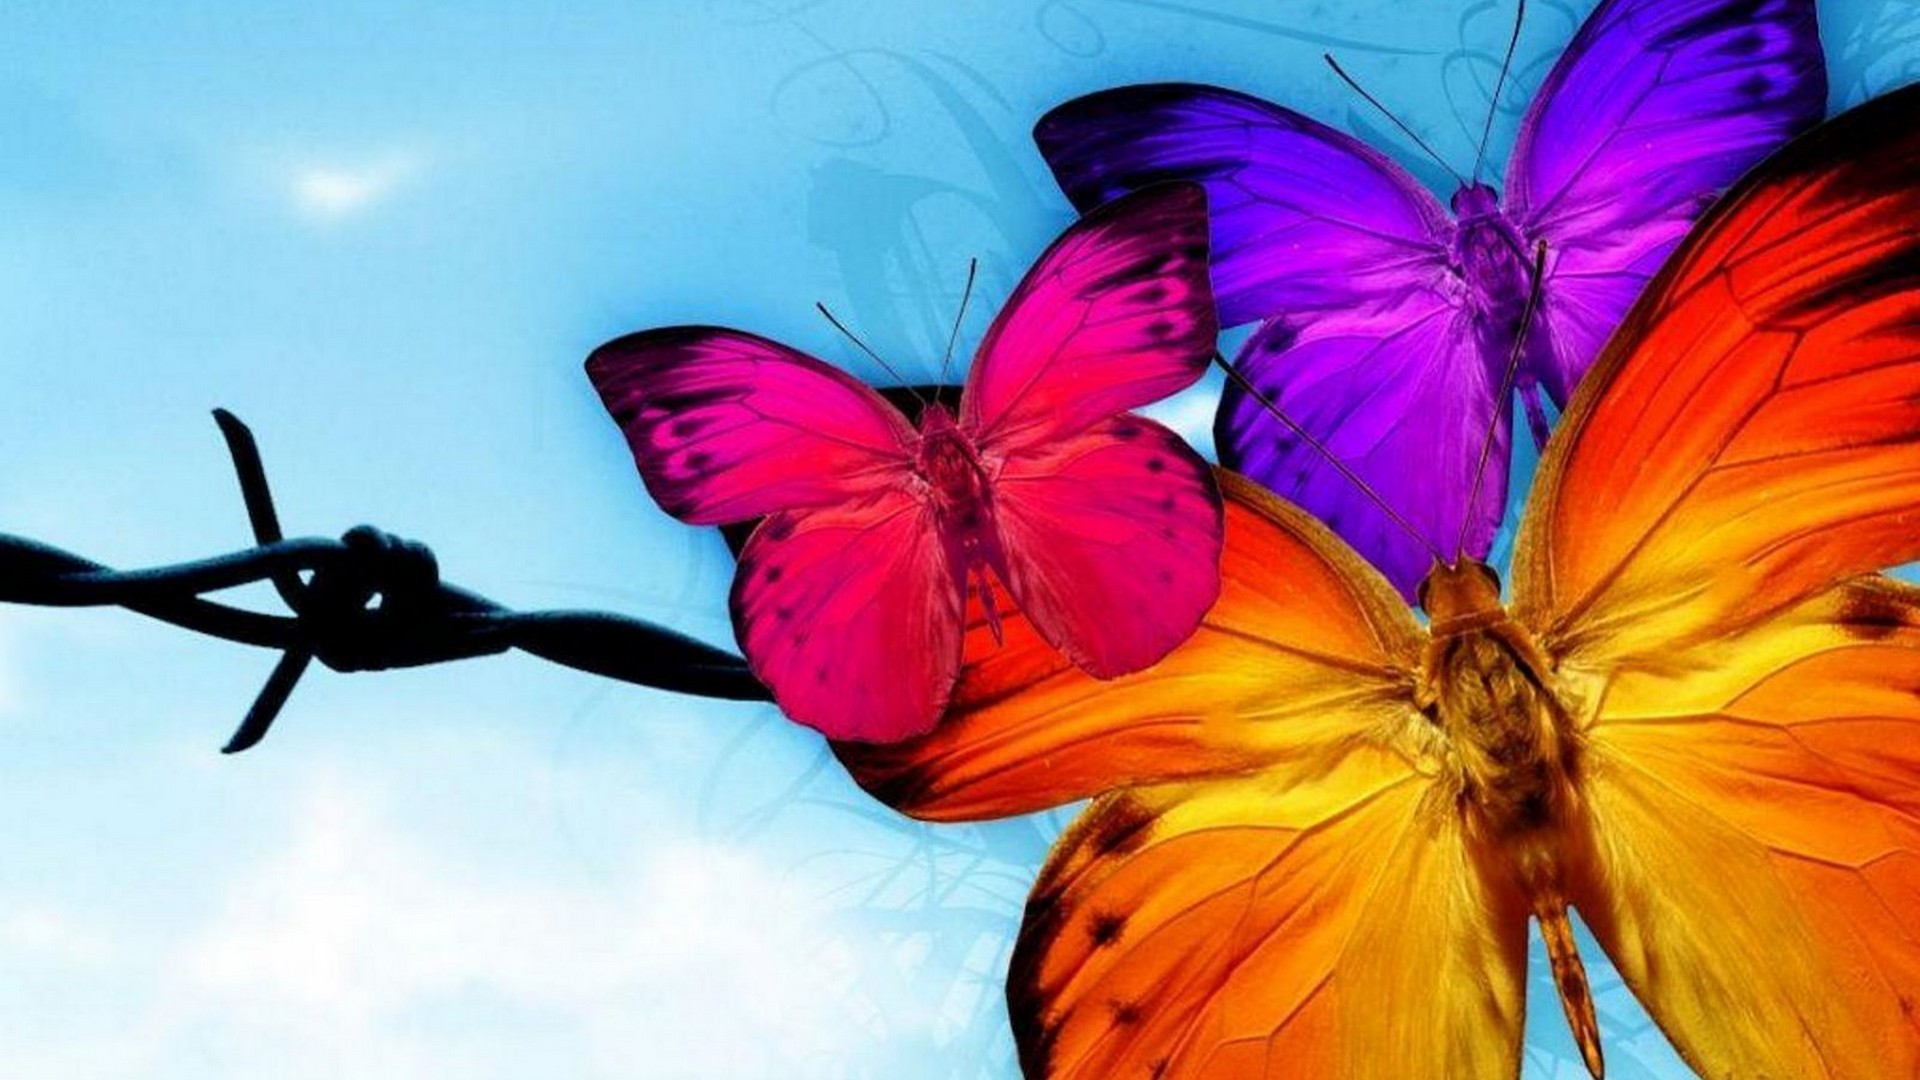 Wallpaper HD Butterfly With Resolution 1920X1080